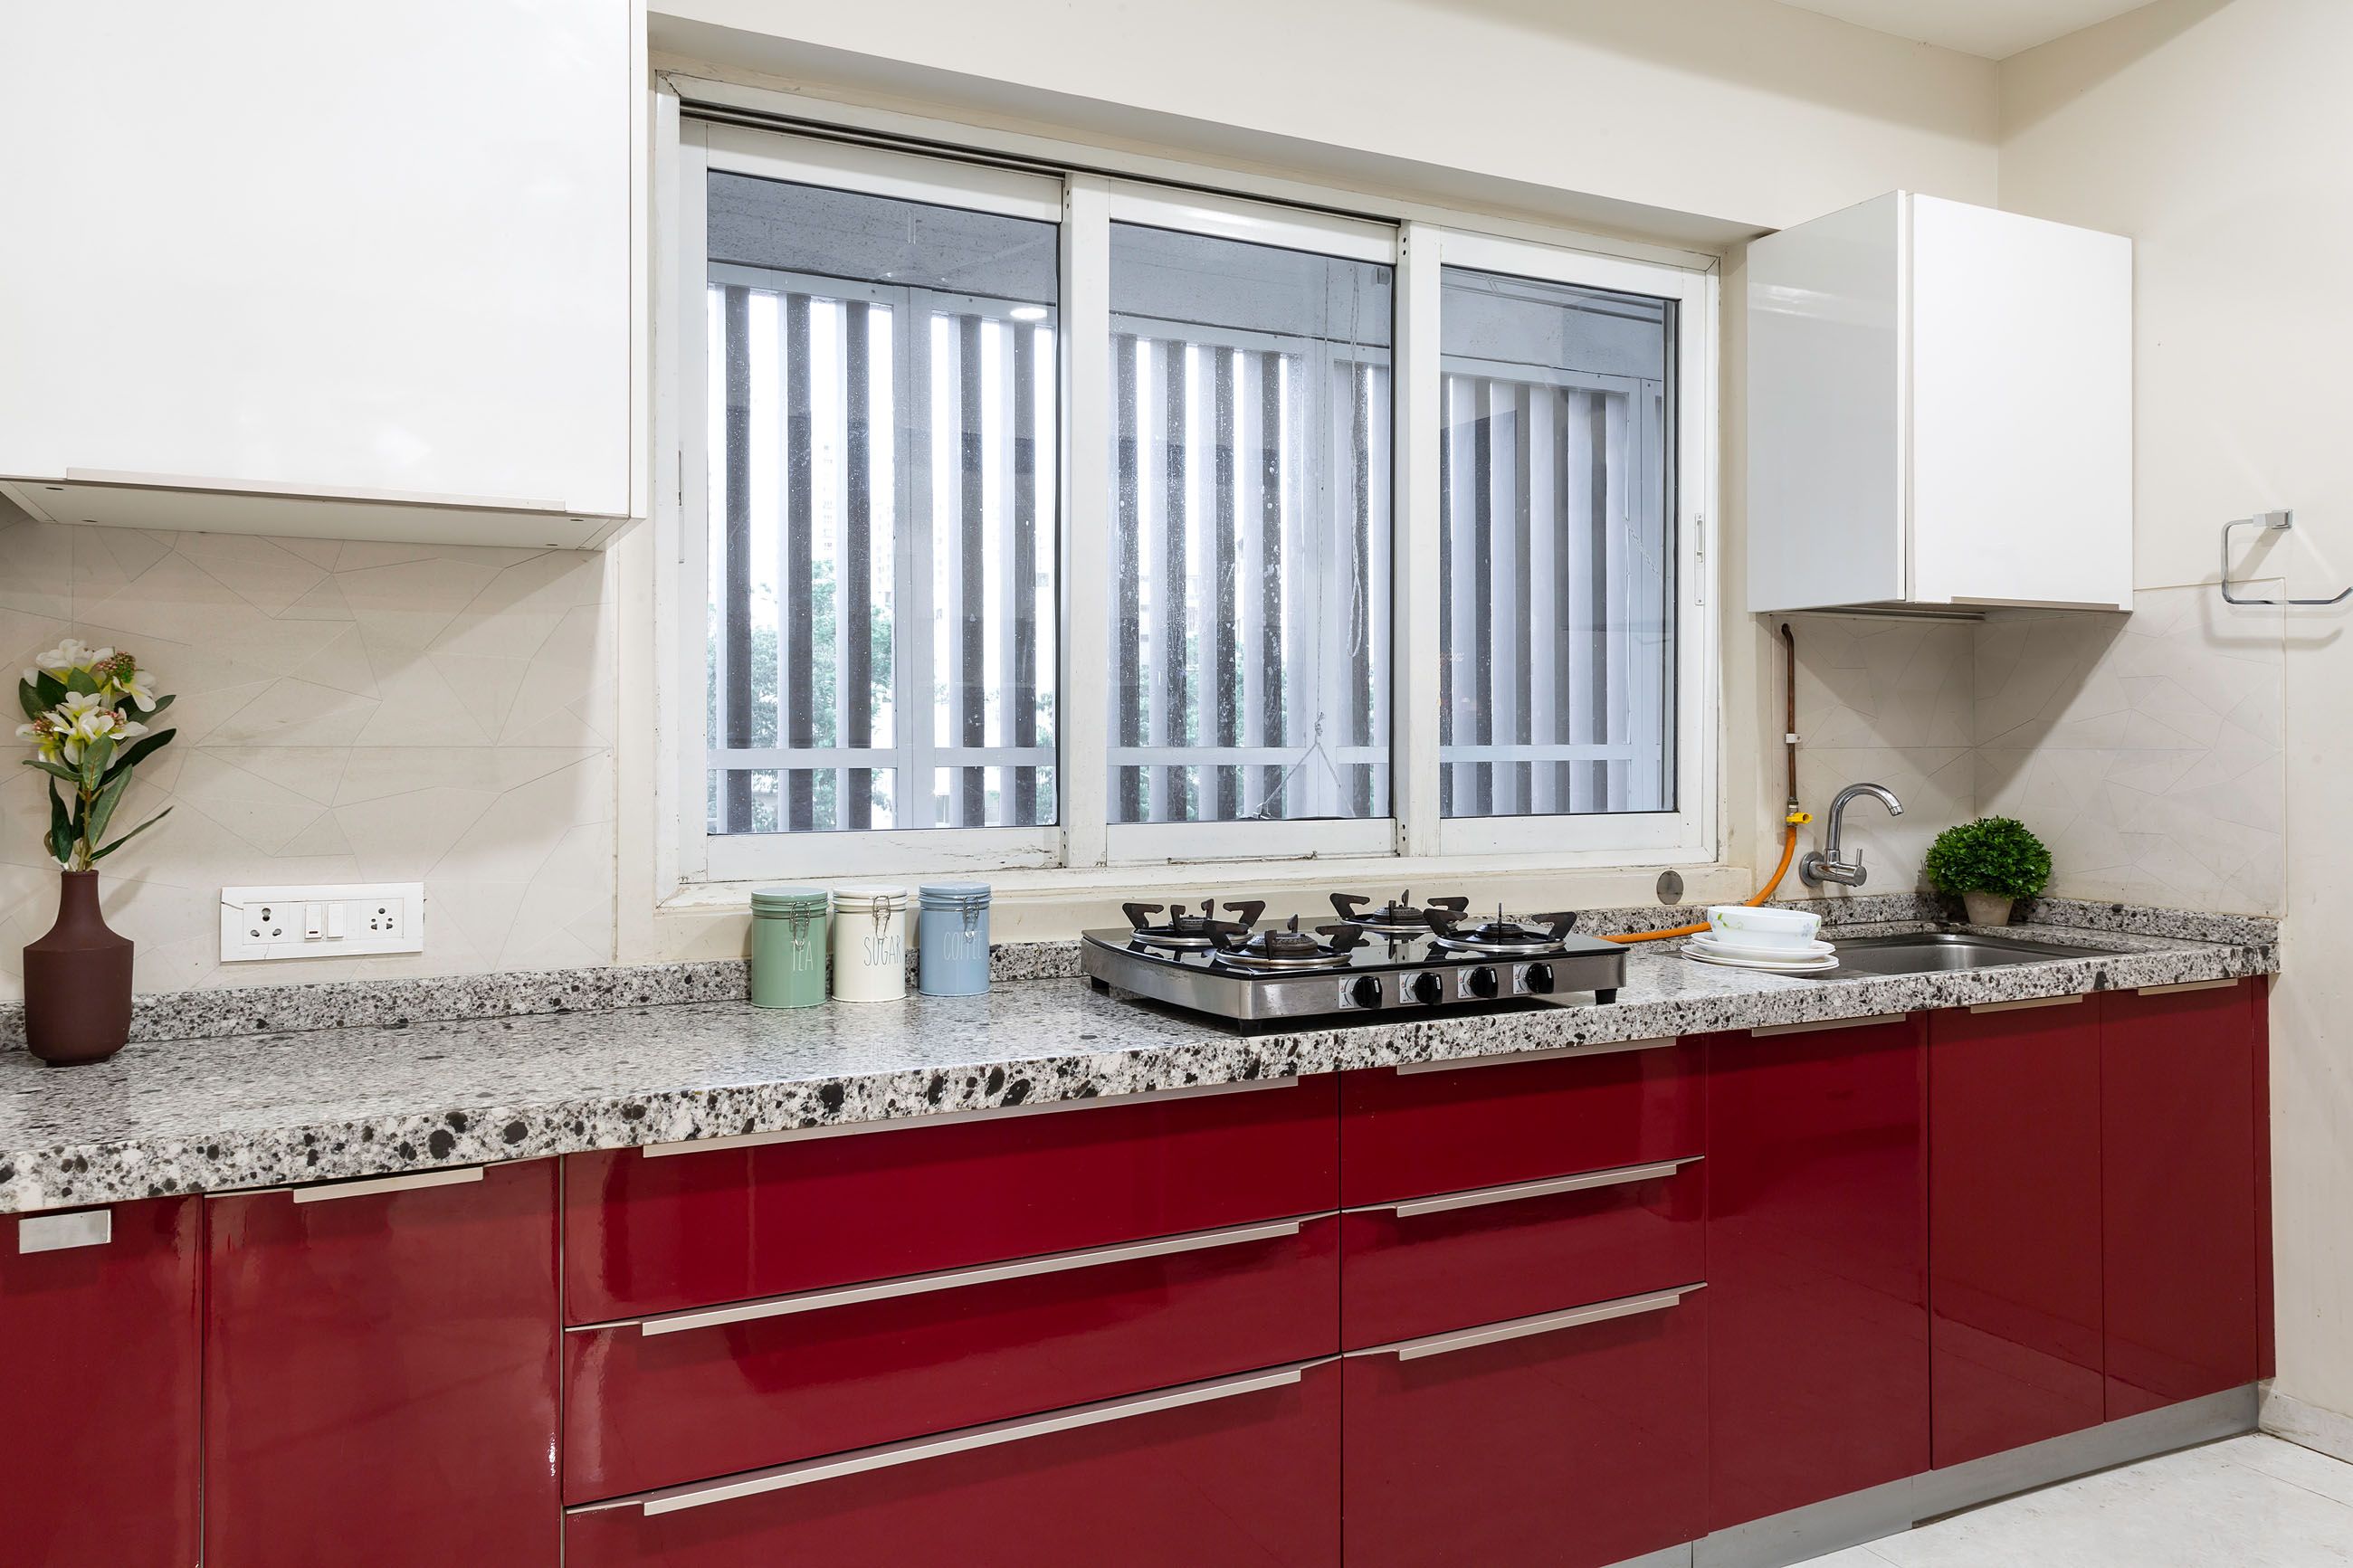 Modern Fire Red And White Modular Kitchen Design With High Gloss Finish